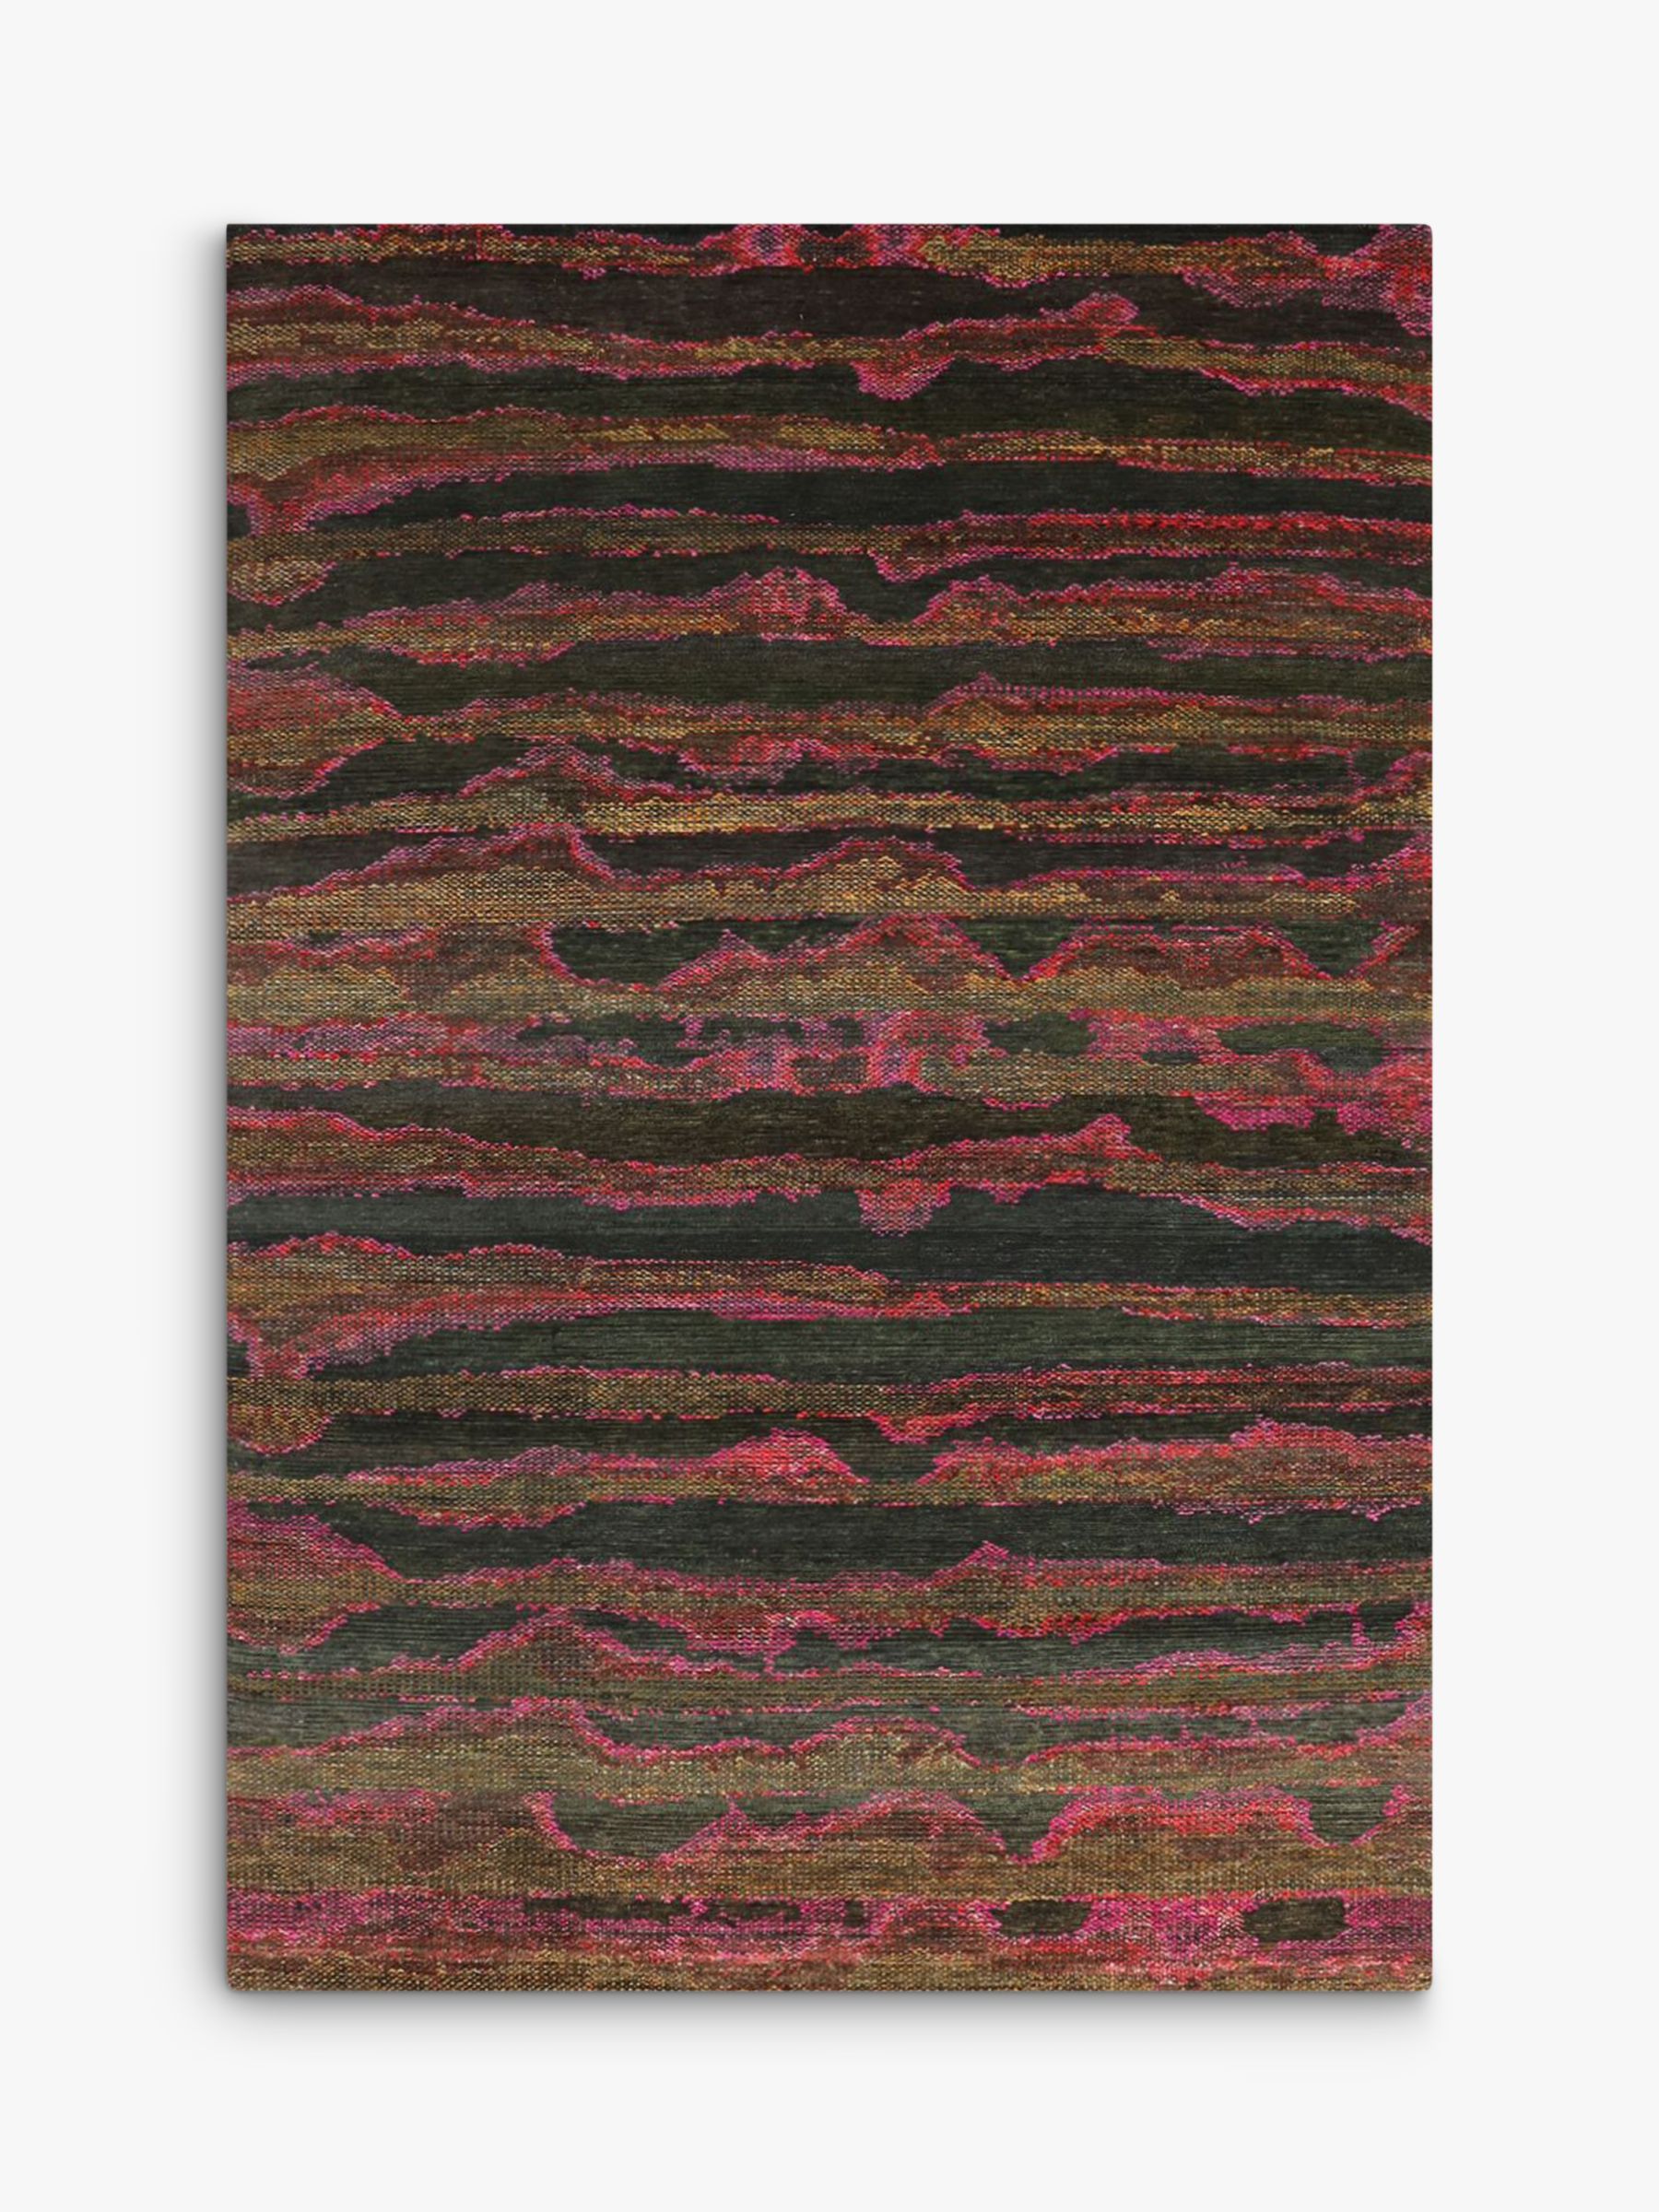 Gooch Luxury Ombre Stripe Wool Silk Rug, How Do You Tell If A Rug Is Silk Or Wool